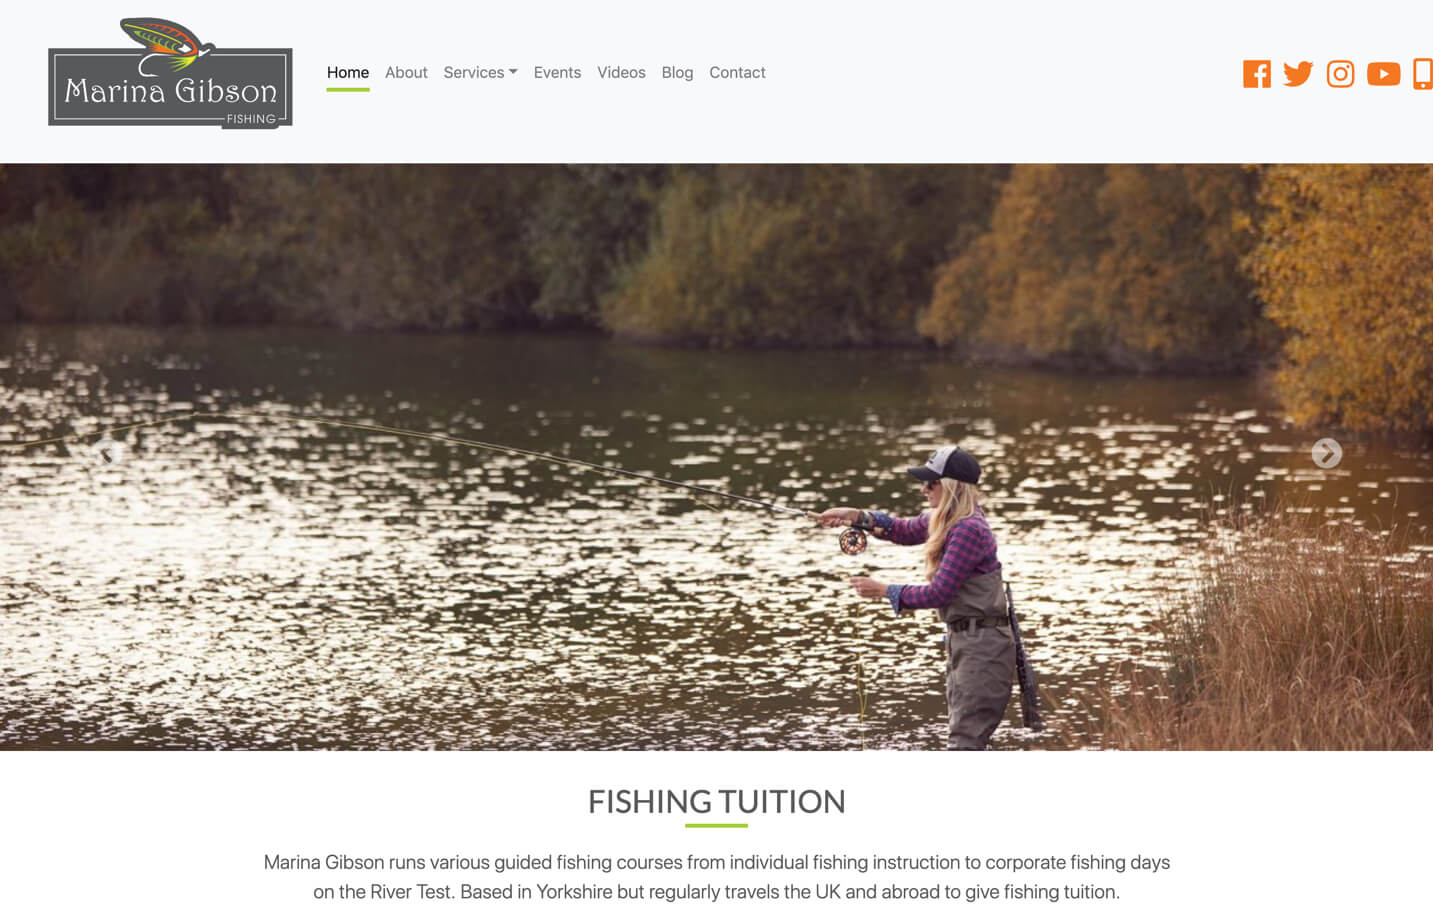 Home page for Marina Gibson Fishing